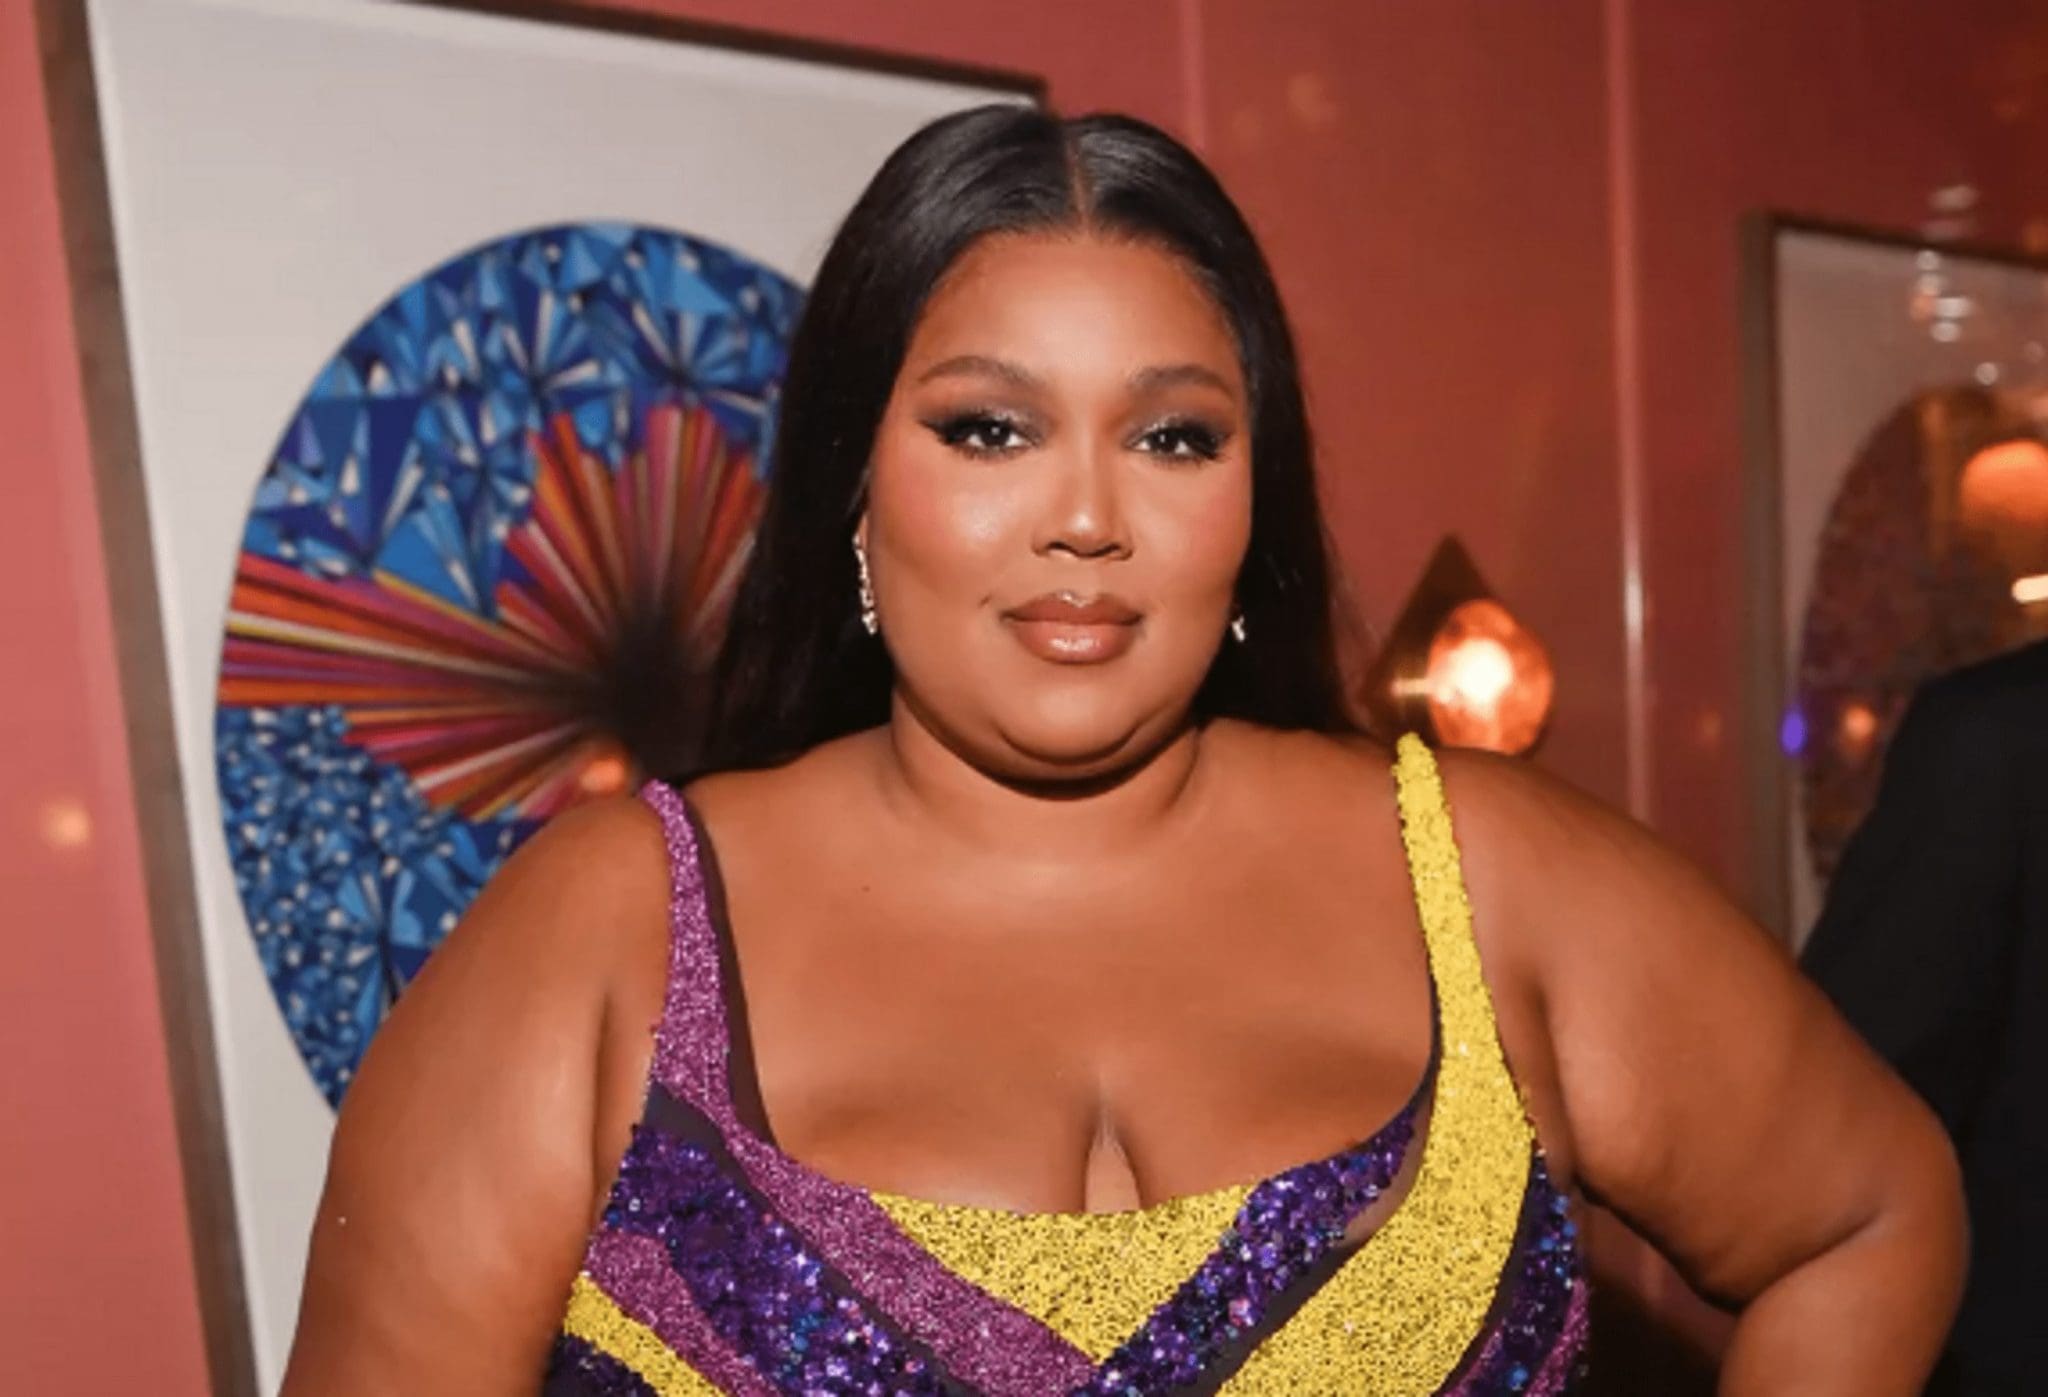 During her trip with friends, Lizzo was photographed on the Shore